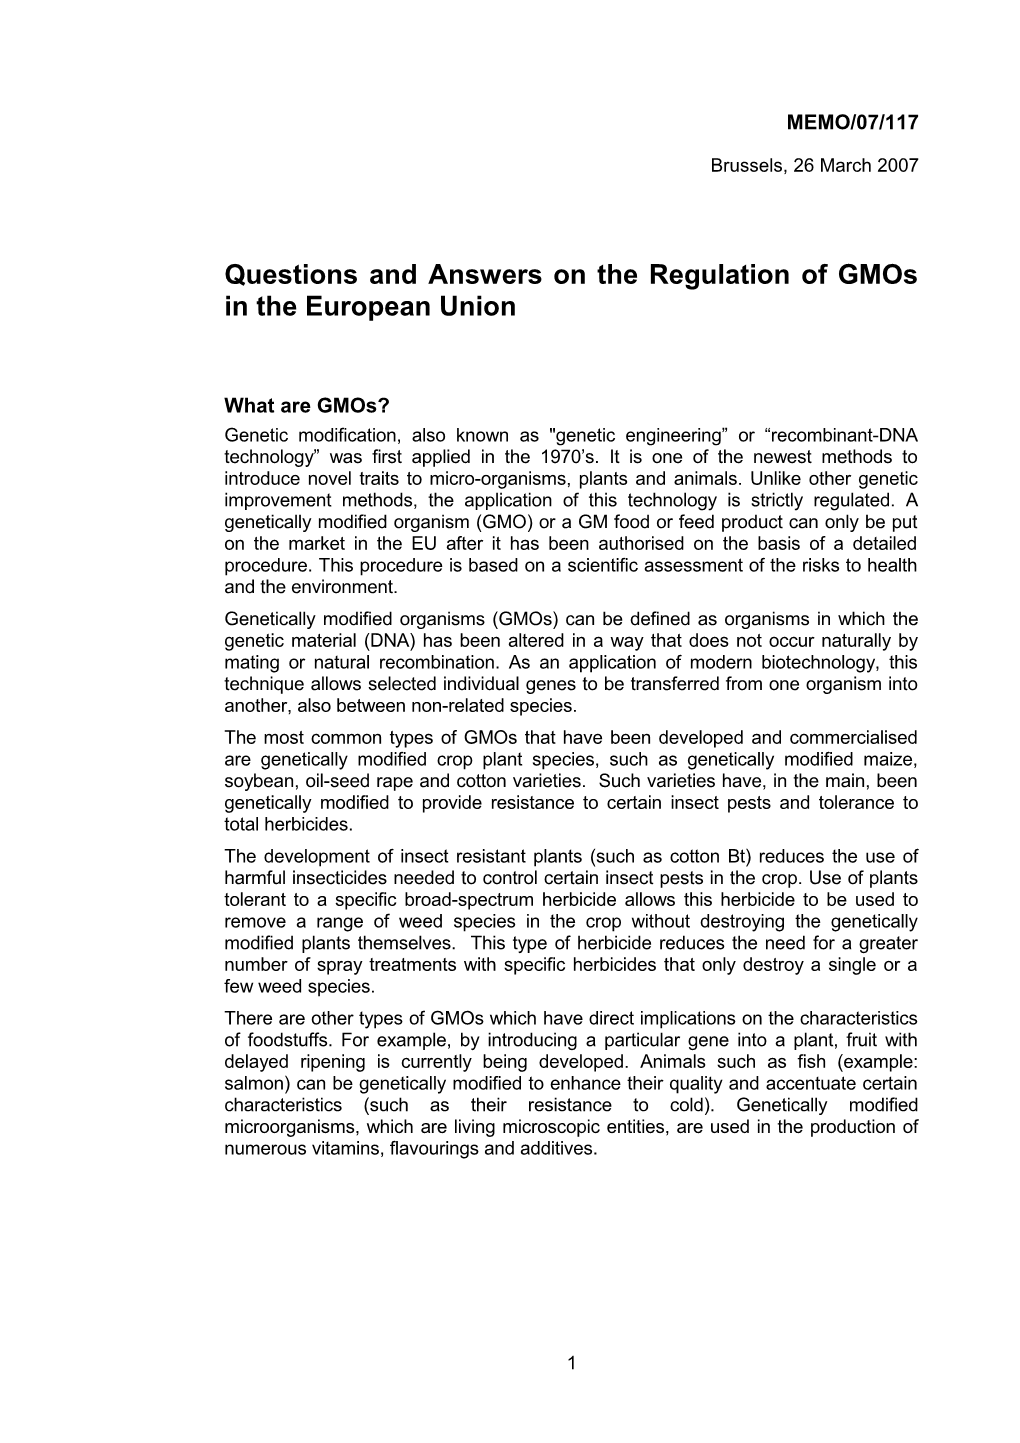 Questions and Answers on the Regulation of Gmos in the European Union